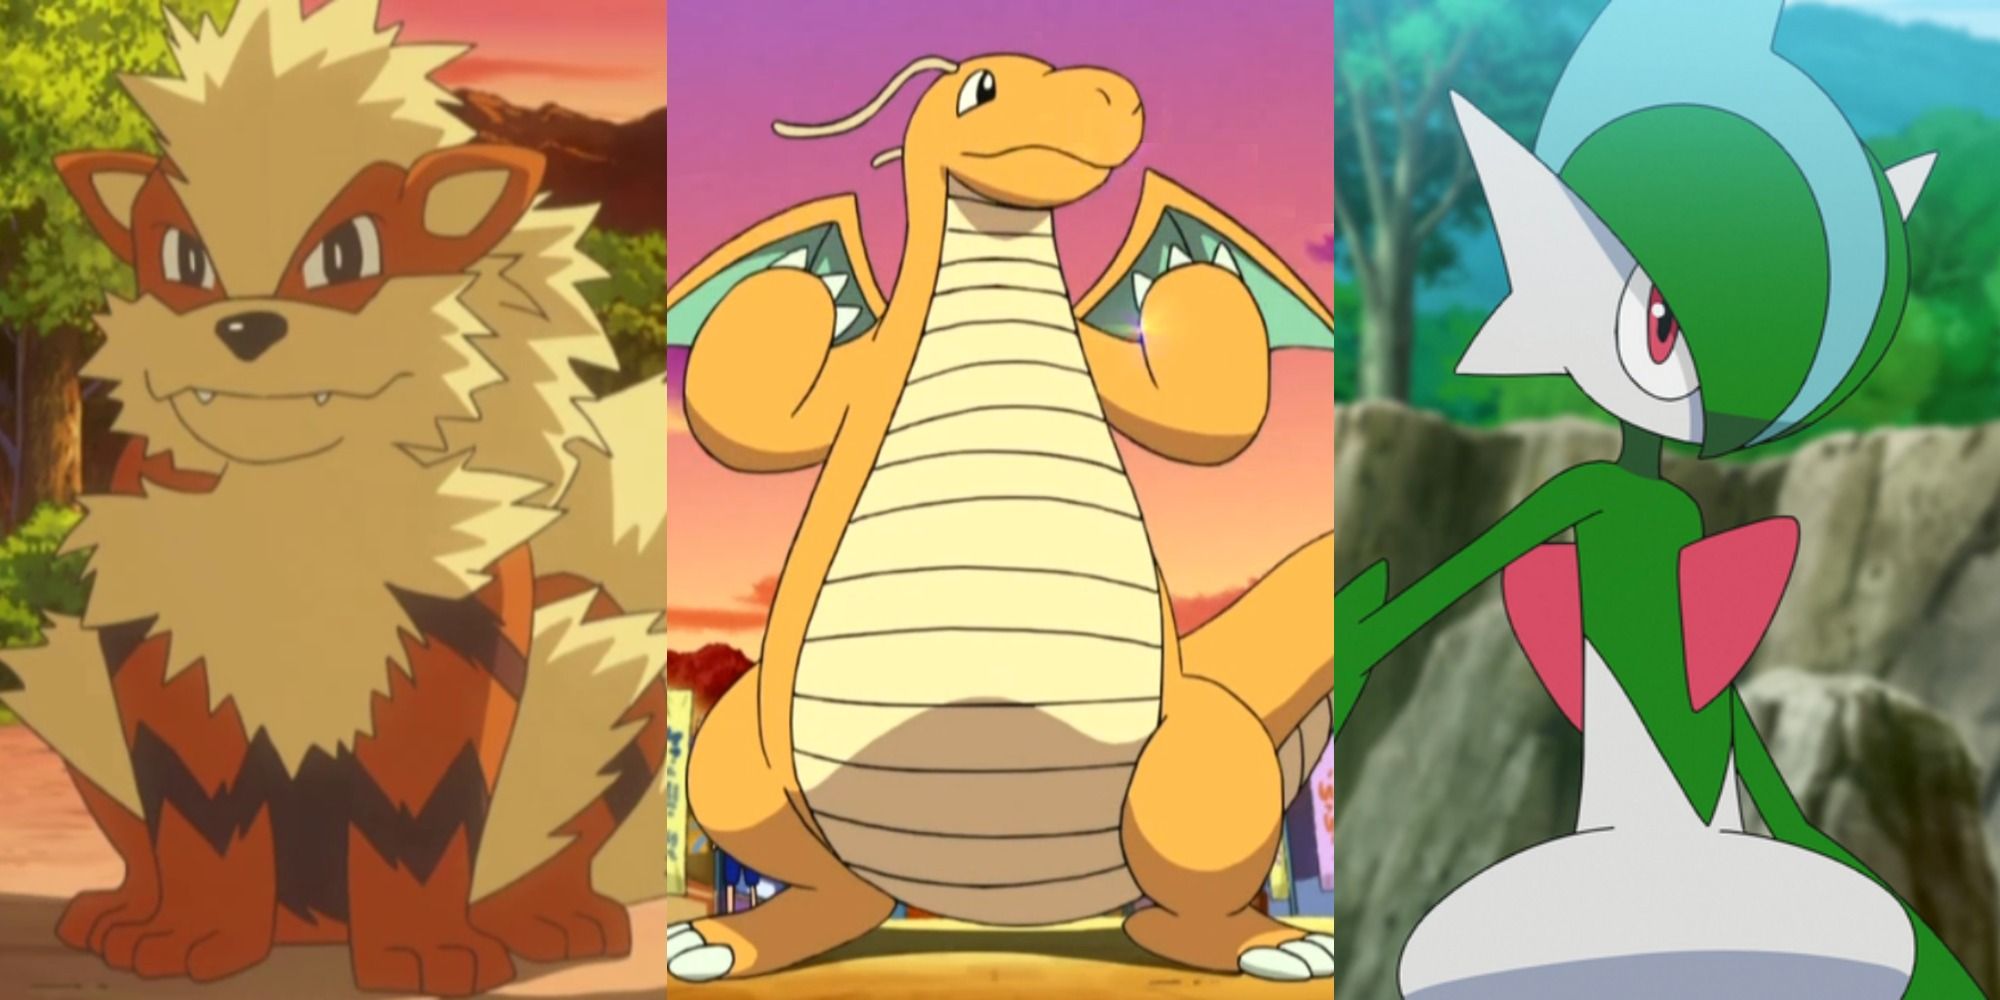 Split image showing Arcanine, Dragonite, and Gallade in the Pokémon anime